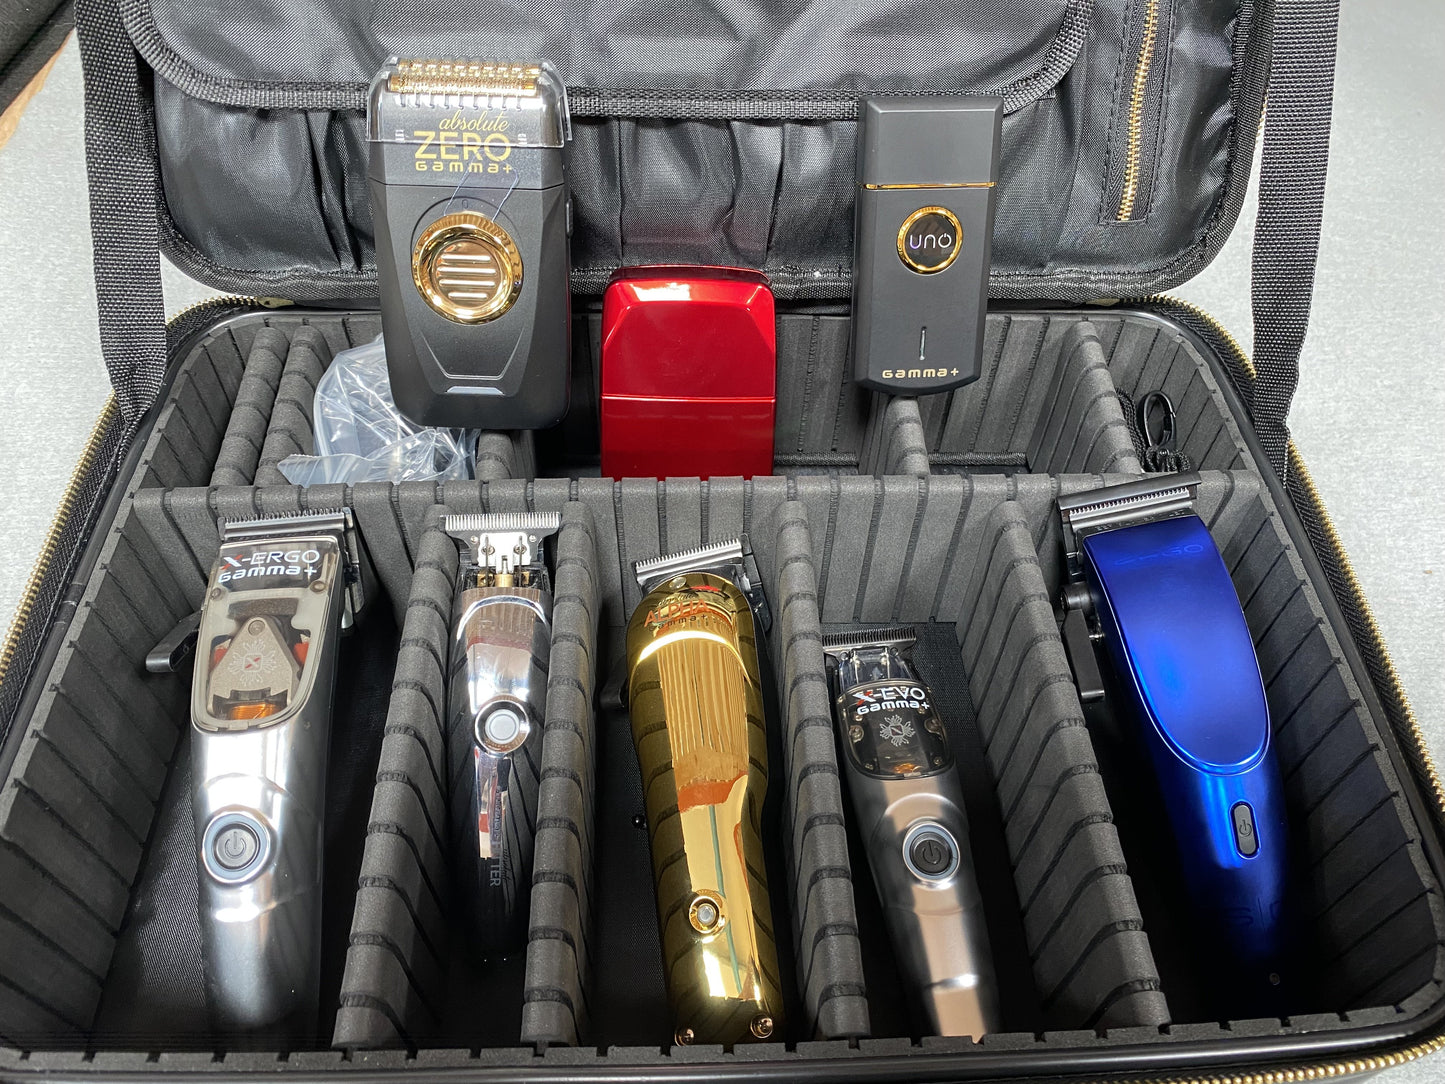 *Gamma+ Multi Functional Case for Barbers and Hairdressers